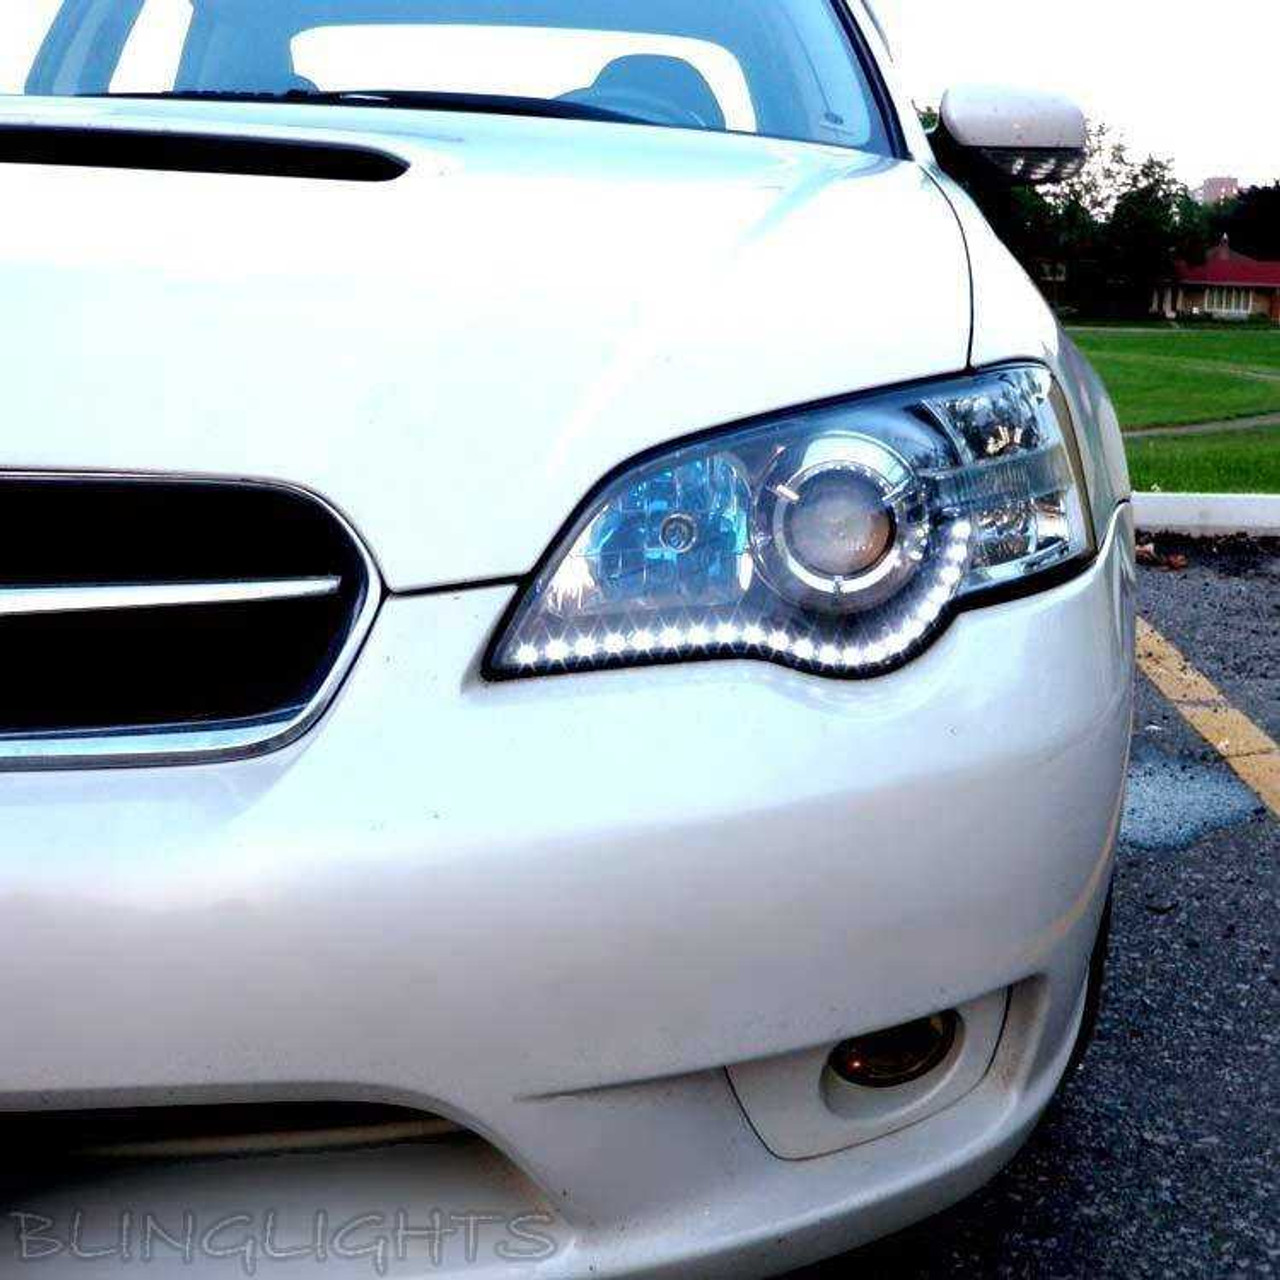 Subaru Liberty LED DRL Light Strips for Headlamps Headlights Head Lamps Day Time Running Lights